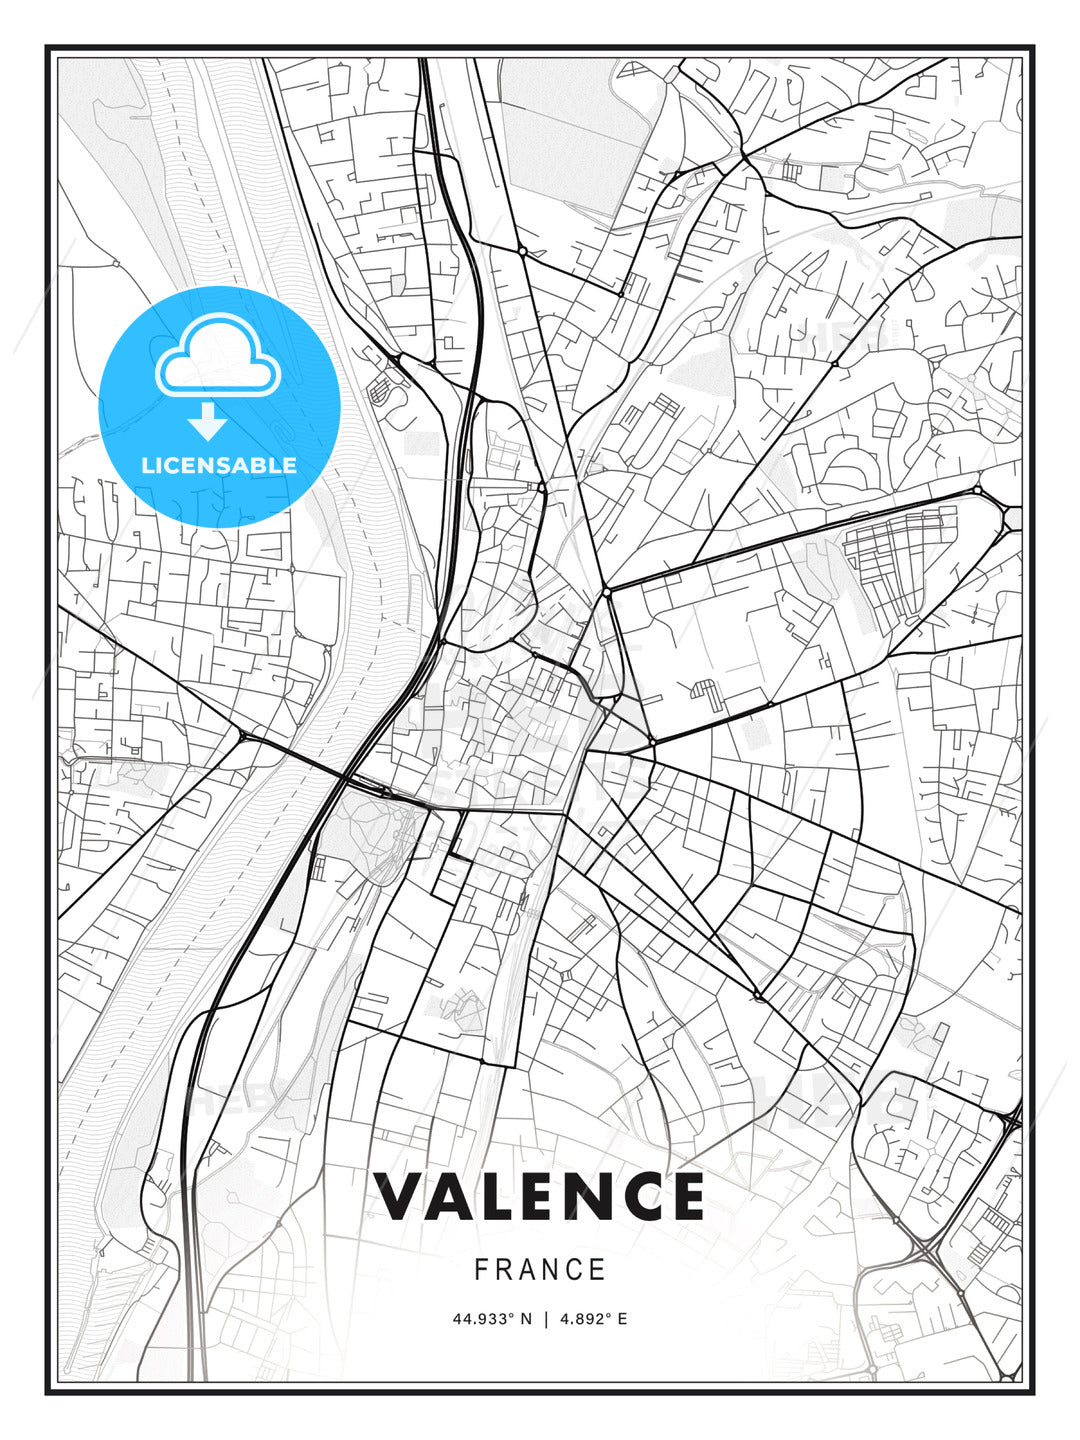 Valence, France, Modern Print Template in Various Formats - HEBSTREITS Sketches